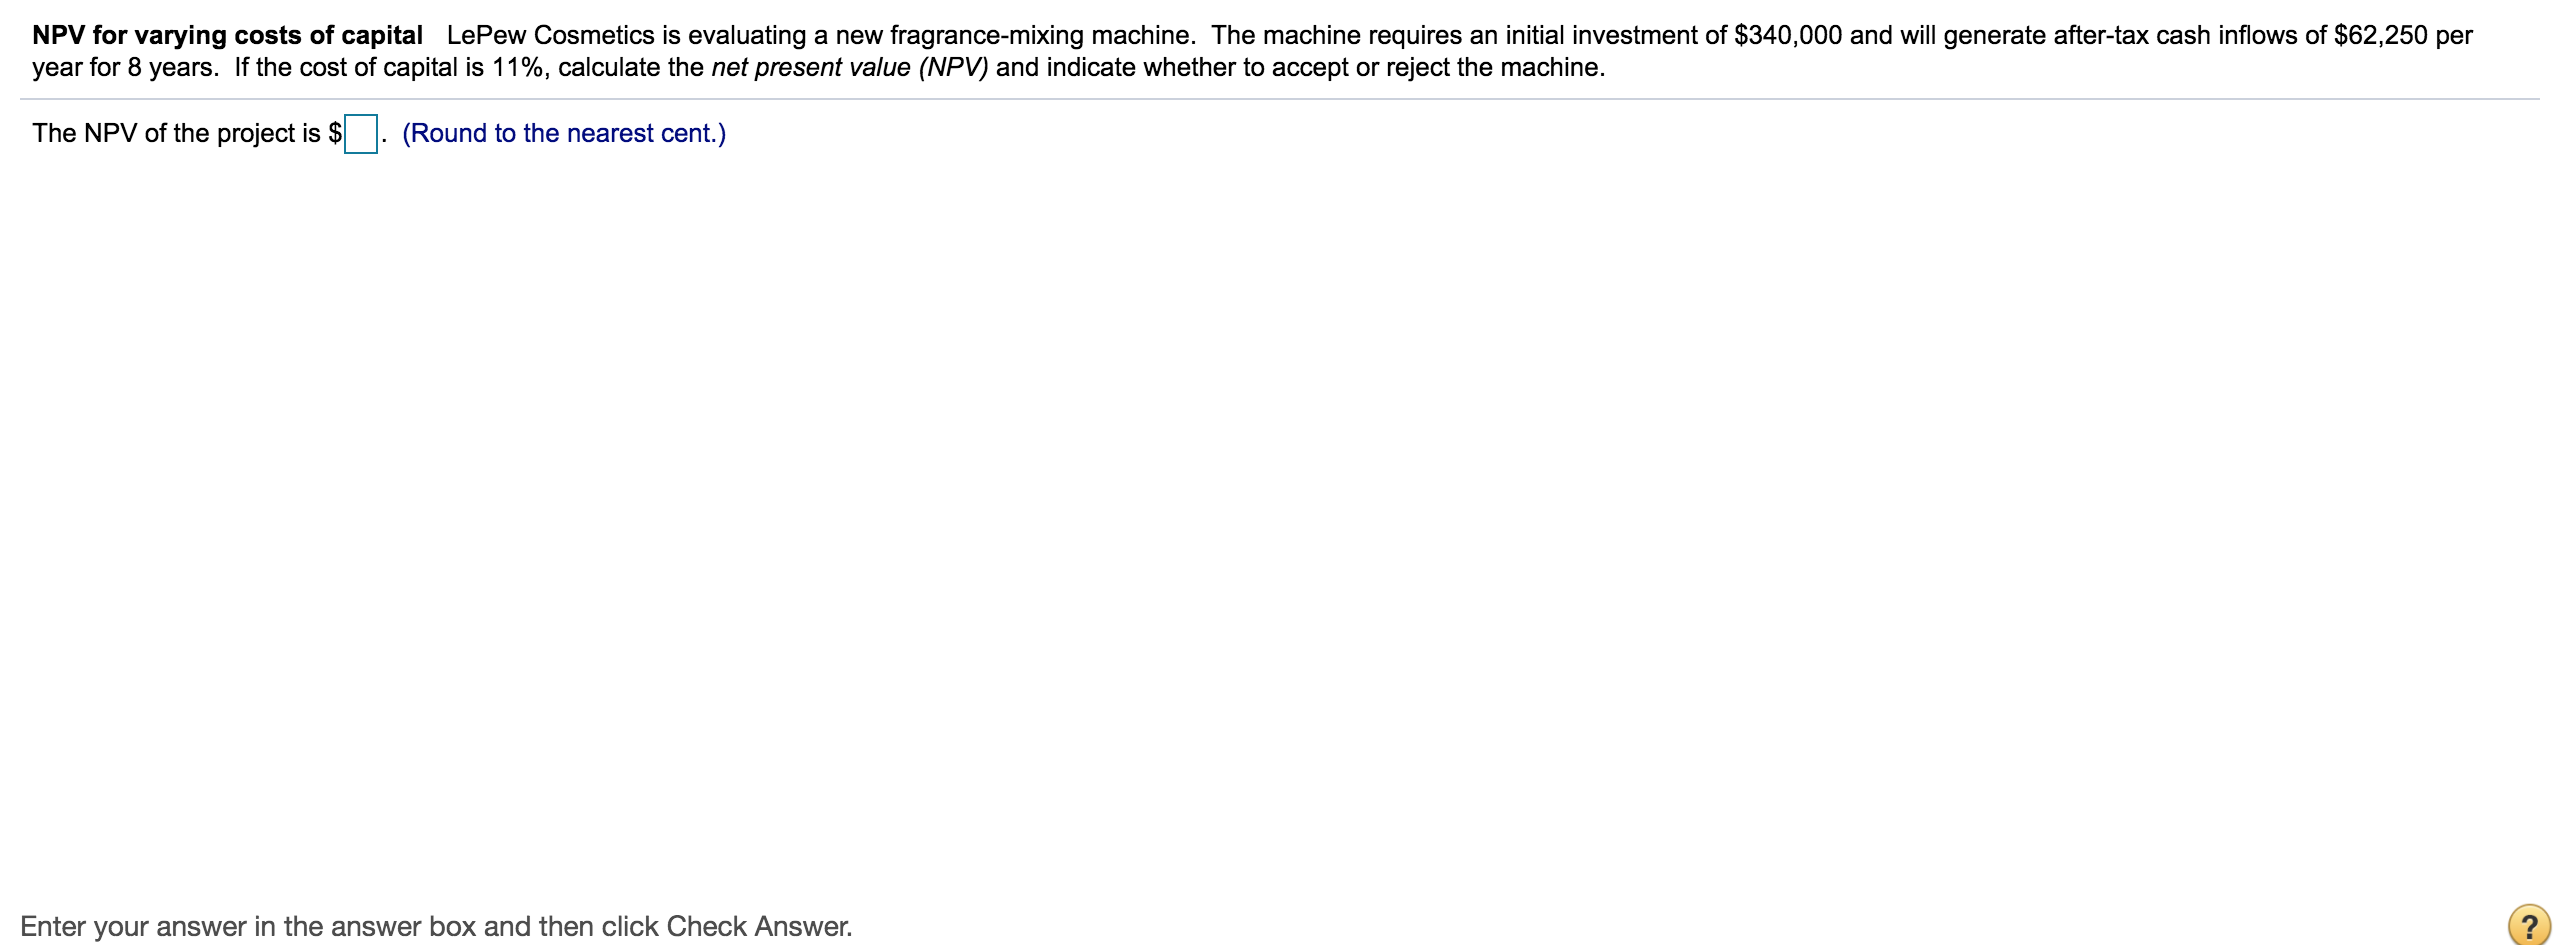 6, calculate the net present value (NPV) and indicate whether to accept or reject the machine.
